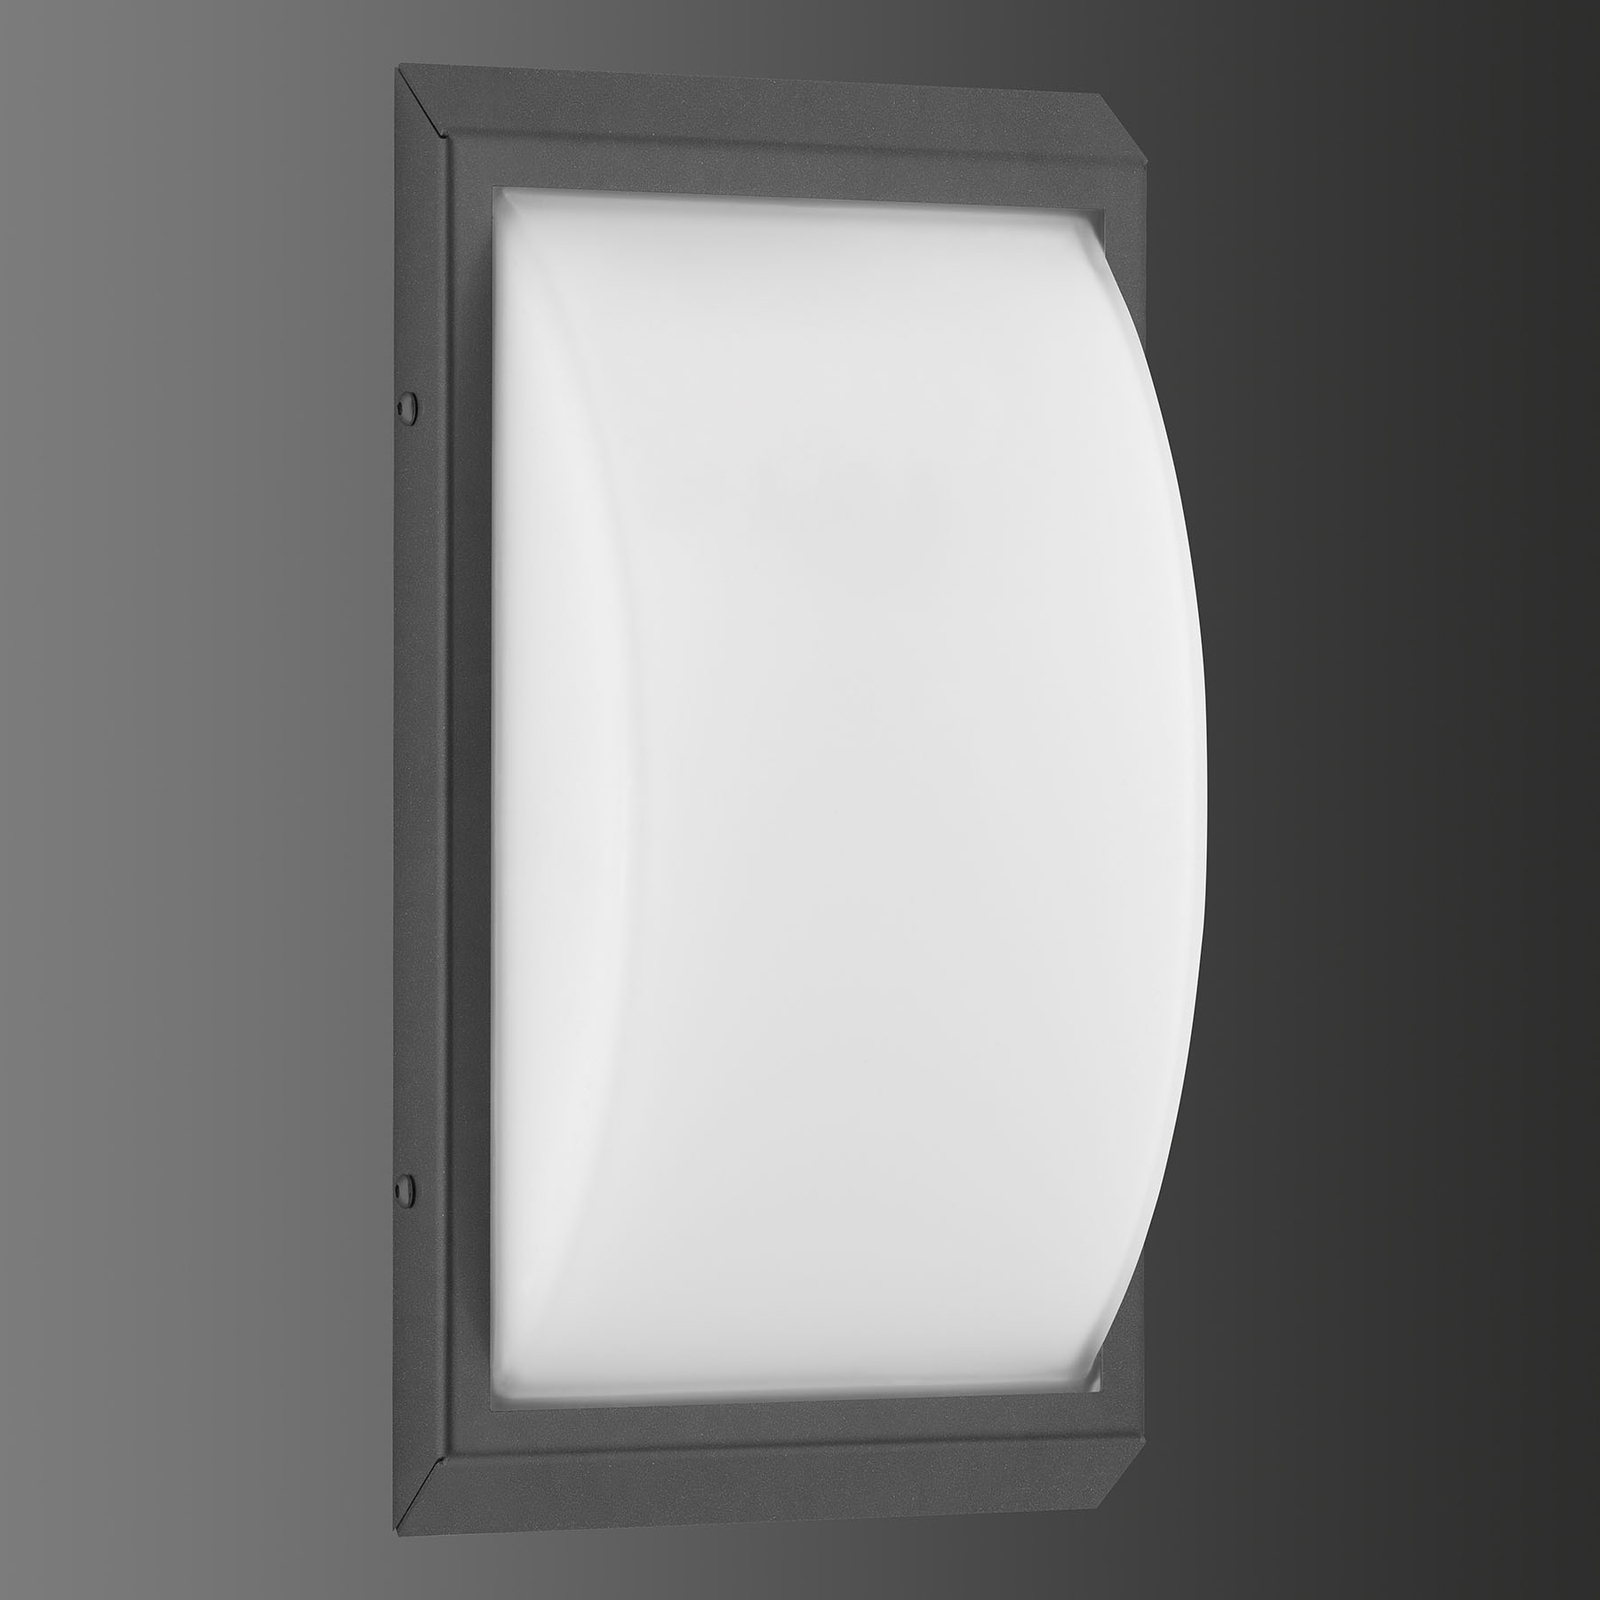 053 outdoor wall light, stainless steel, graphite